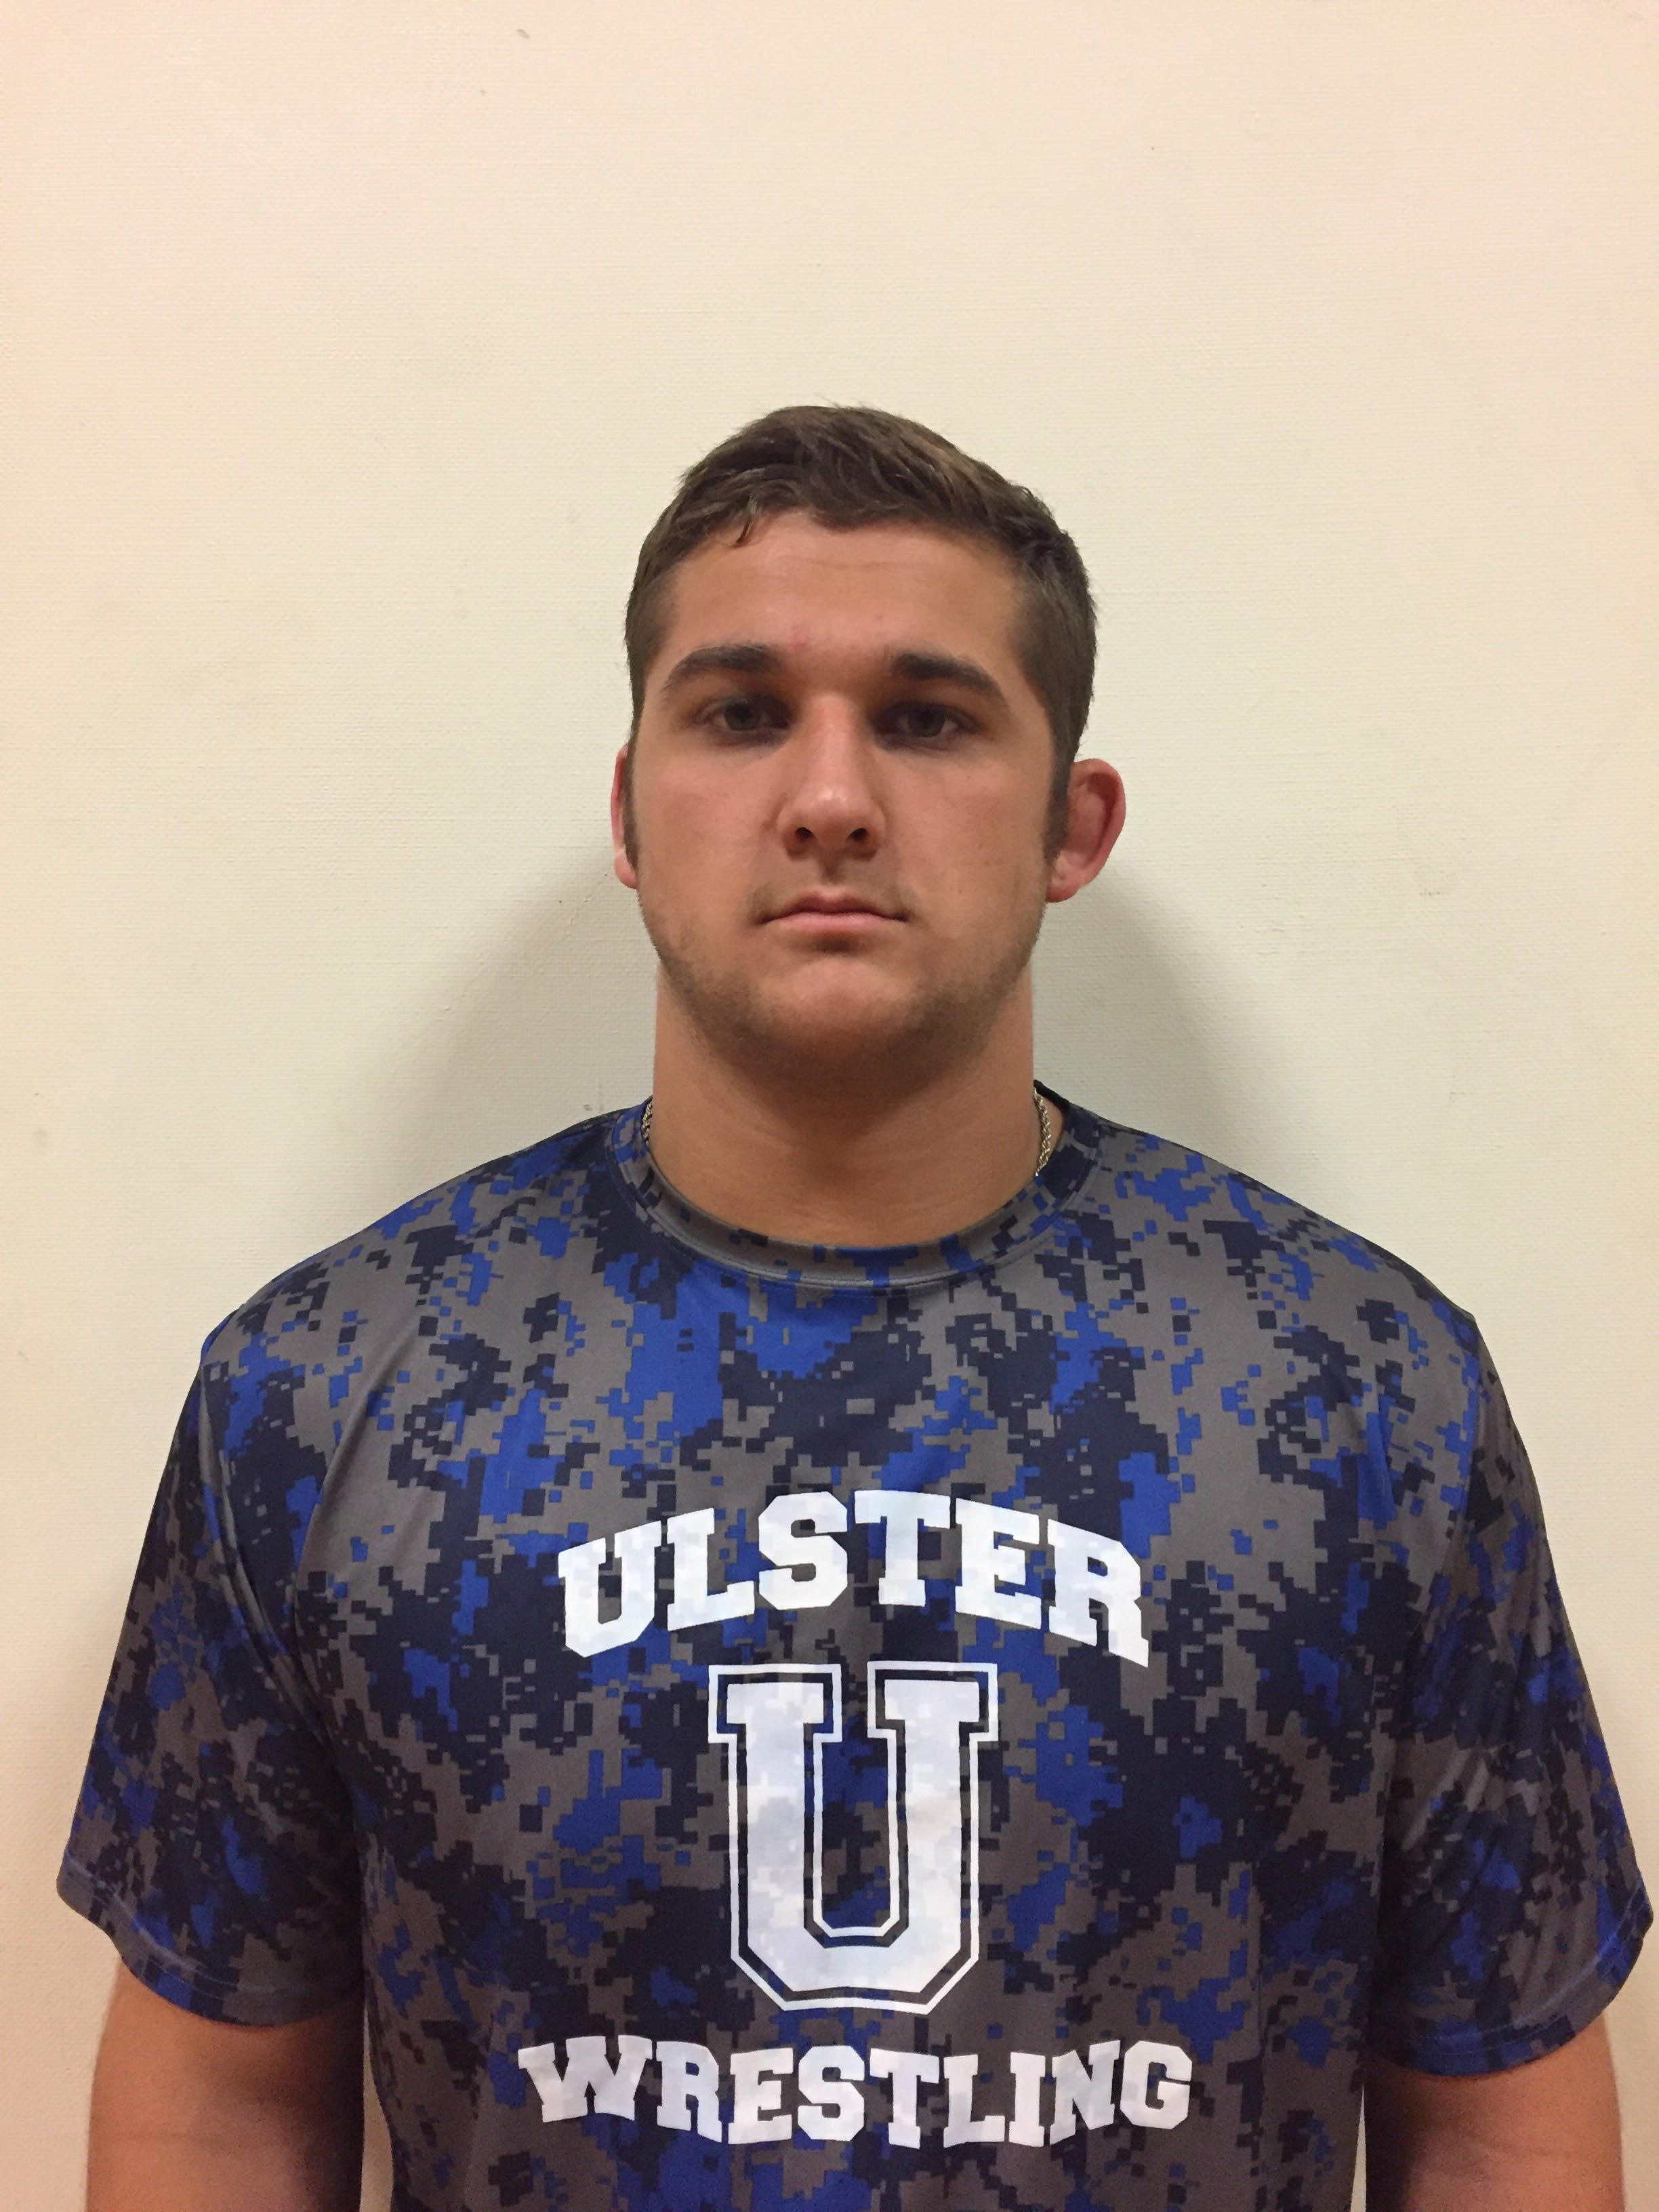 Ulster’s Mike Fekishazy Named Athlete of the Week